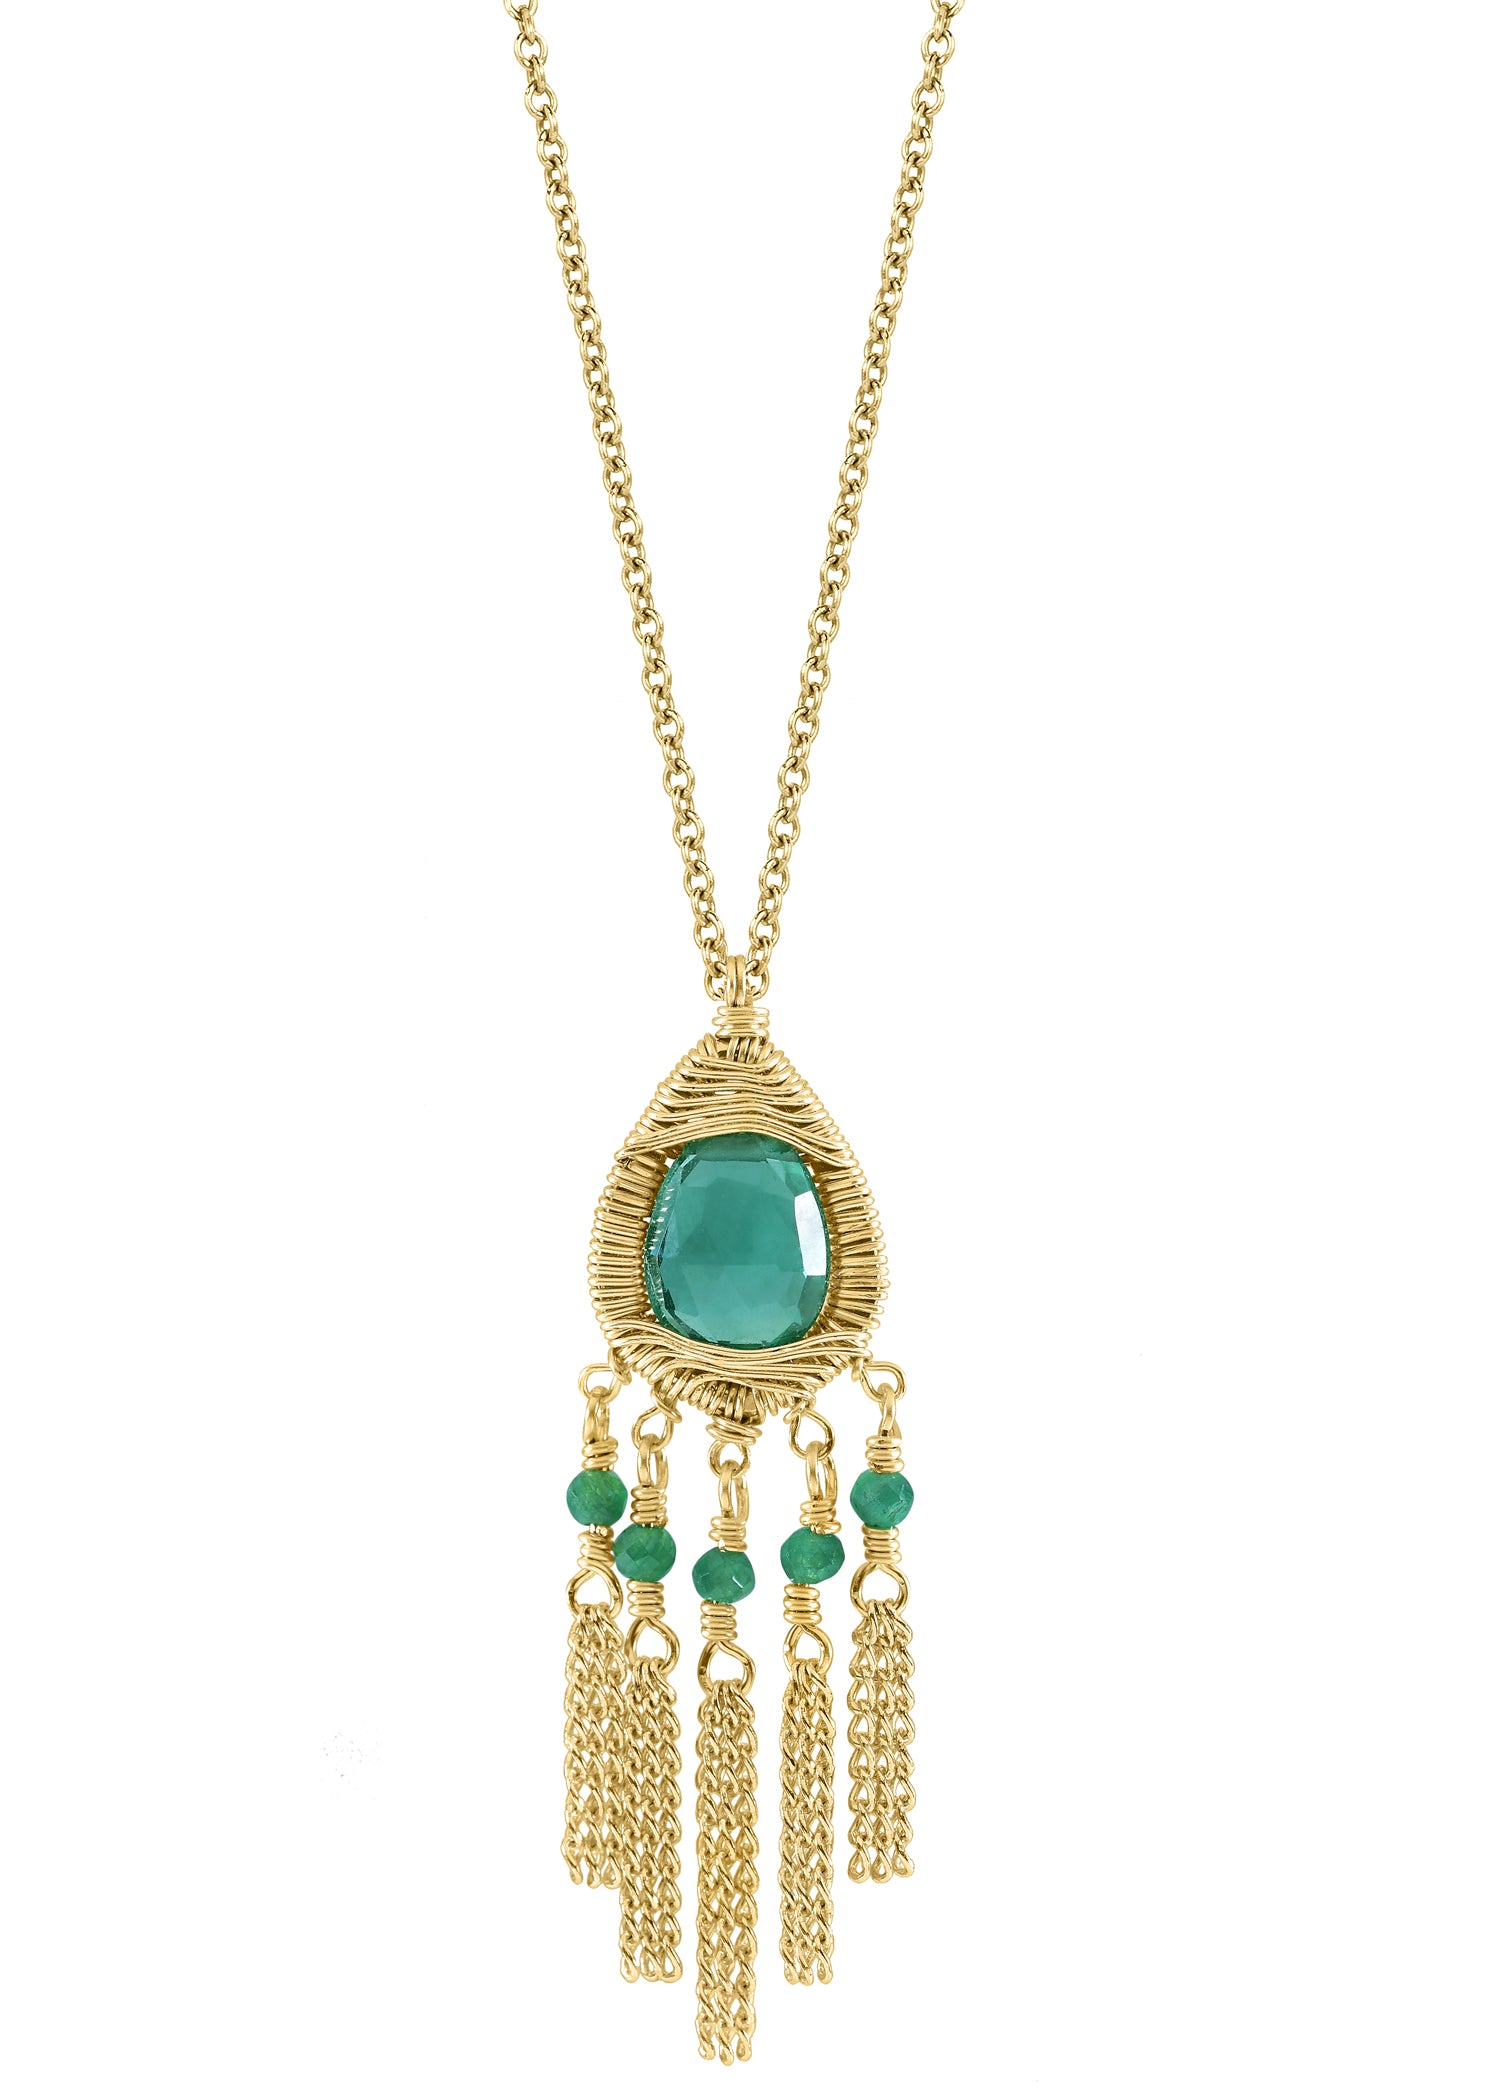 Emerald Green quartz 14k gold fill Necklace measures 17" in length Pendant measures 1-1/4" in length and 1/2" in width at the widest point Handmade in our Los Angeles studio